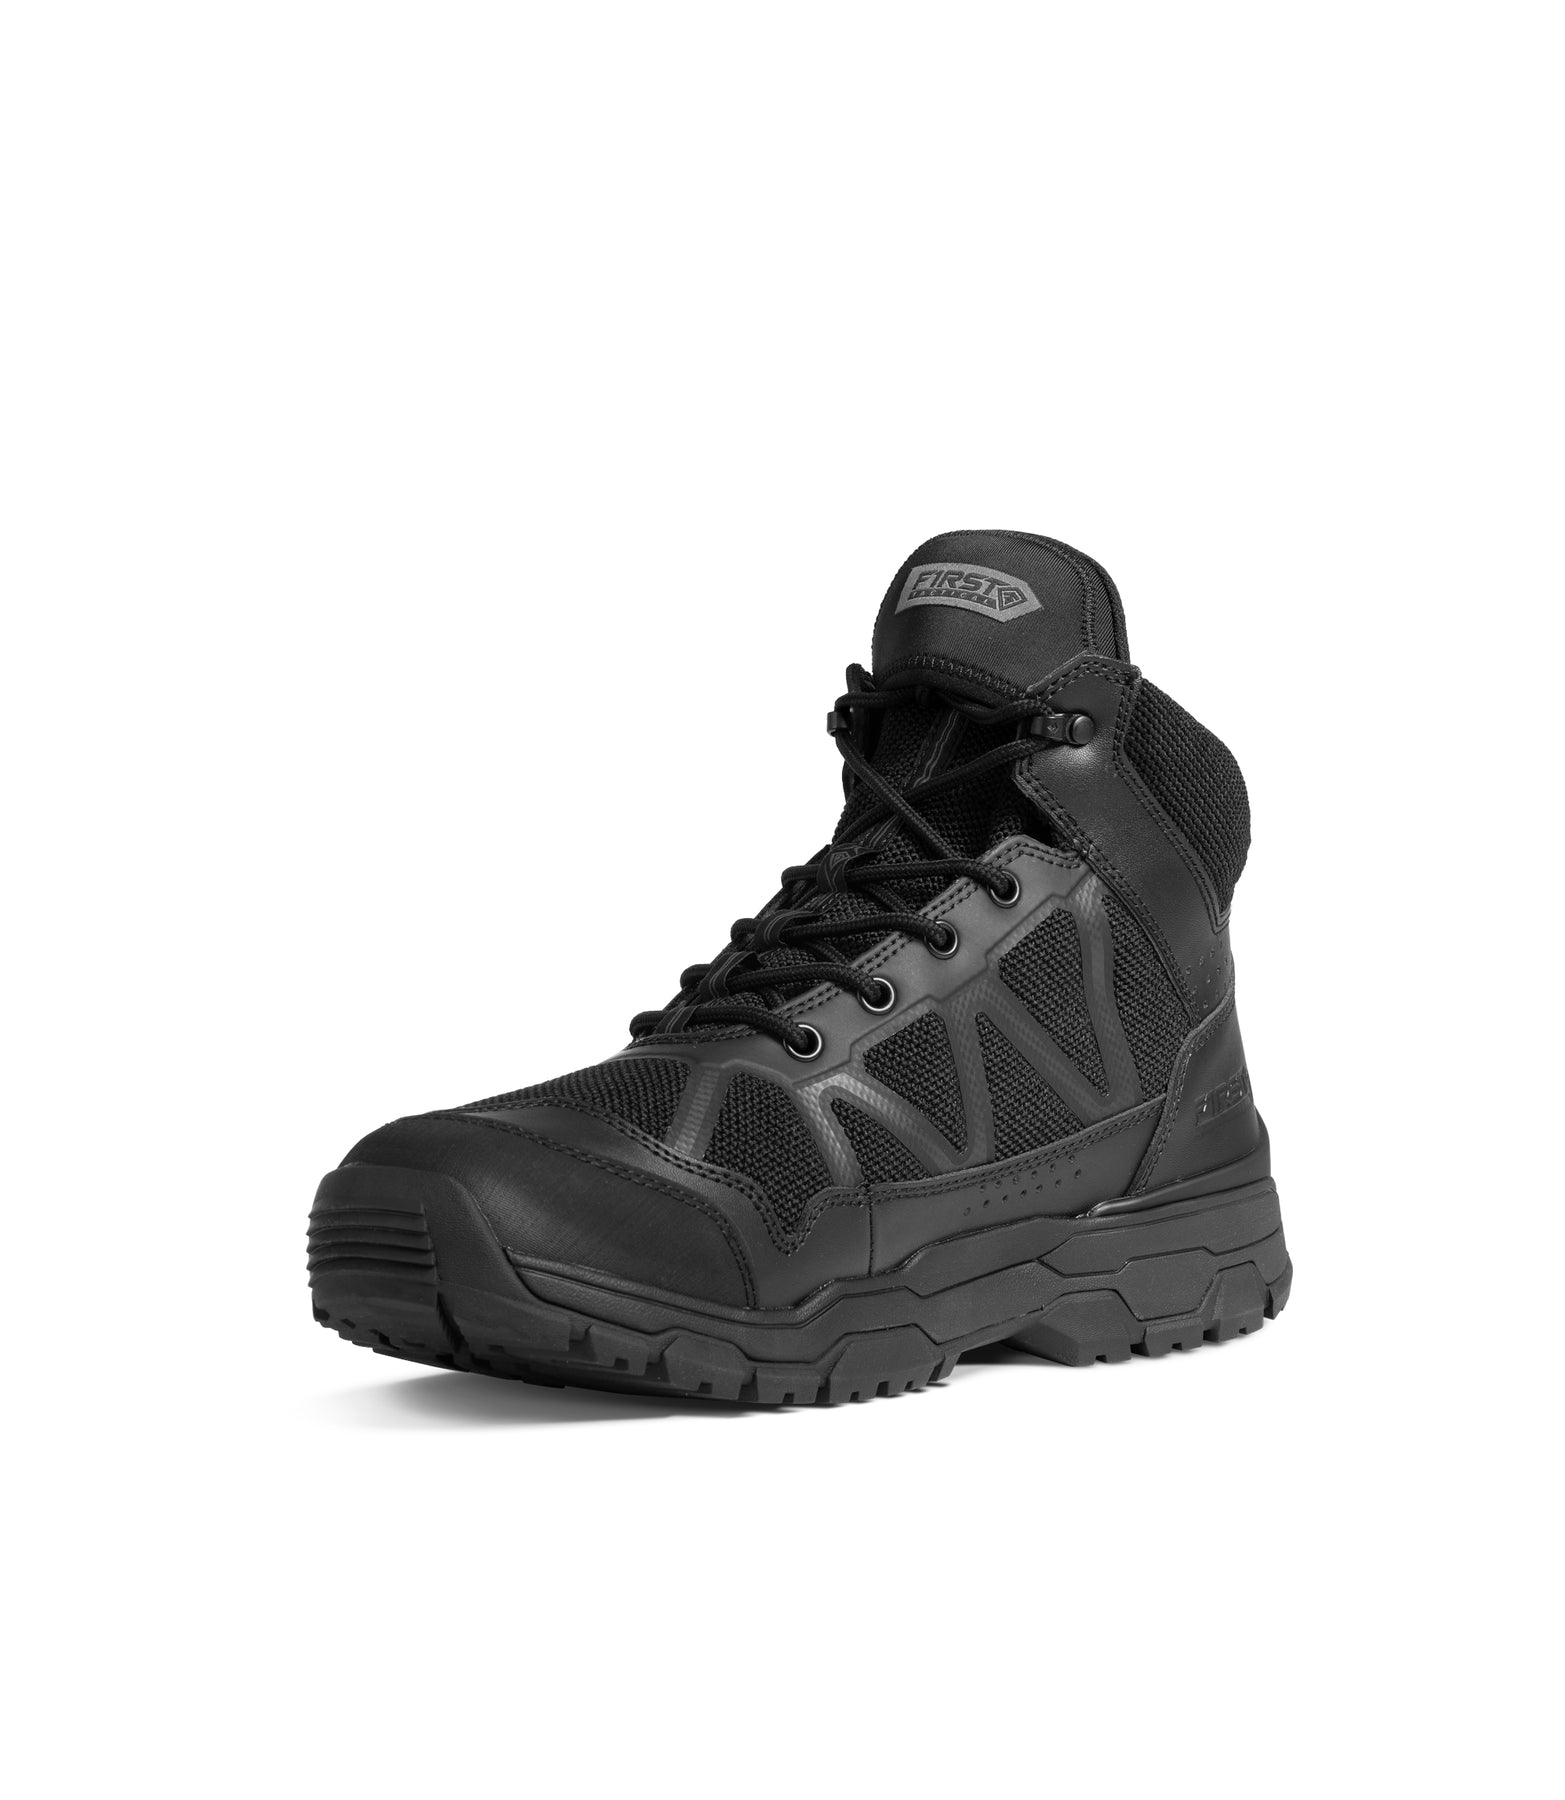 **ARRIVING SOON** First Tactical Men's 5" Operator Mid (165061) (Available in Black & Coyote)